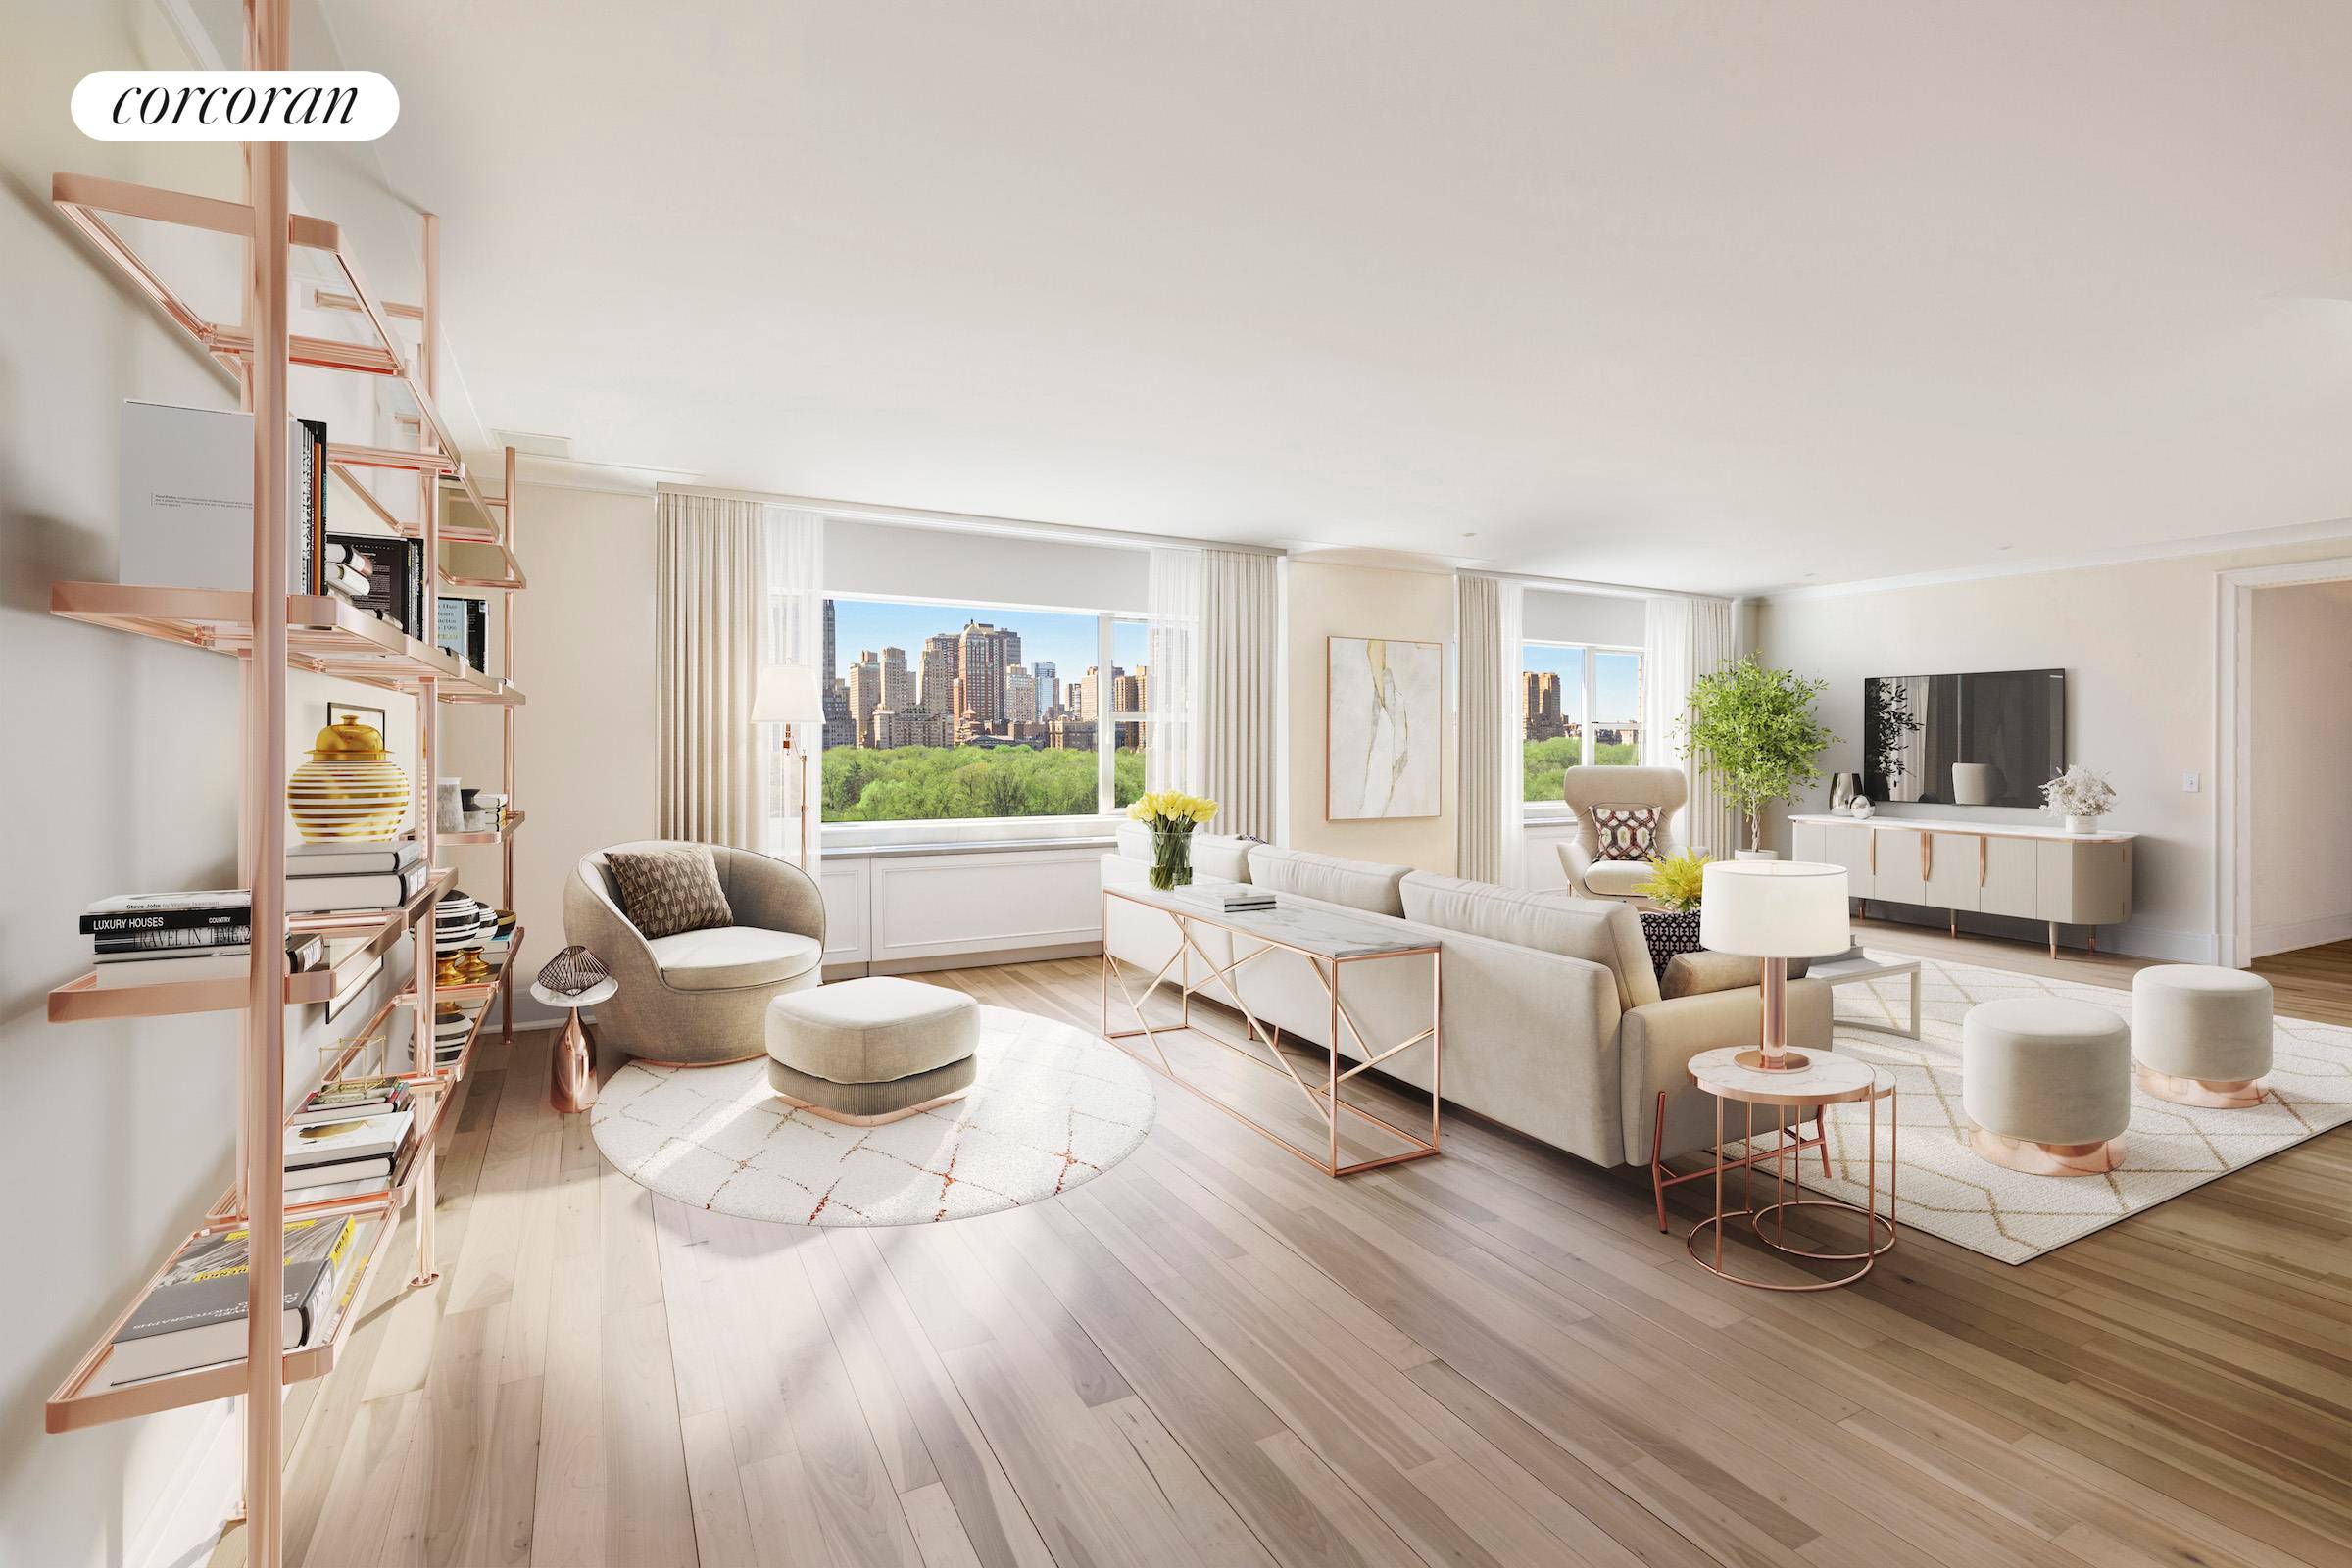 The entire length of this apartment offers iconic views of Central Park, including The Pond, Hallett Nature Sanctuary and Wollman Skating Rink in the foreground, framed by the stunning skyline ...